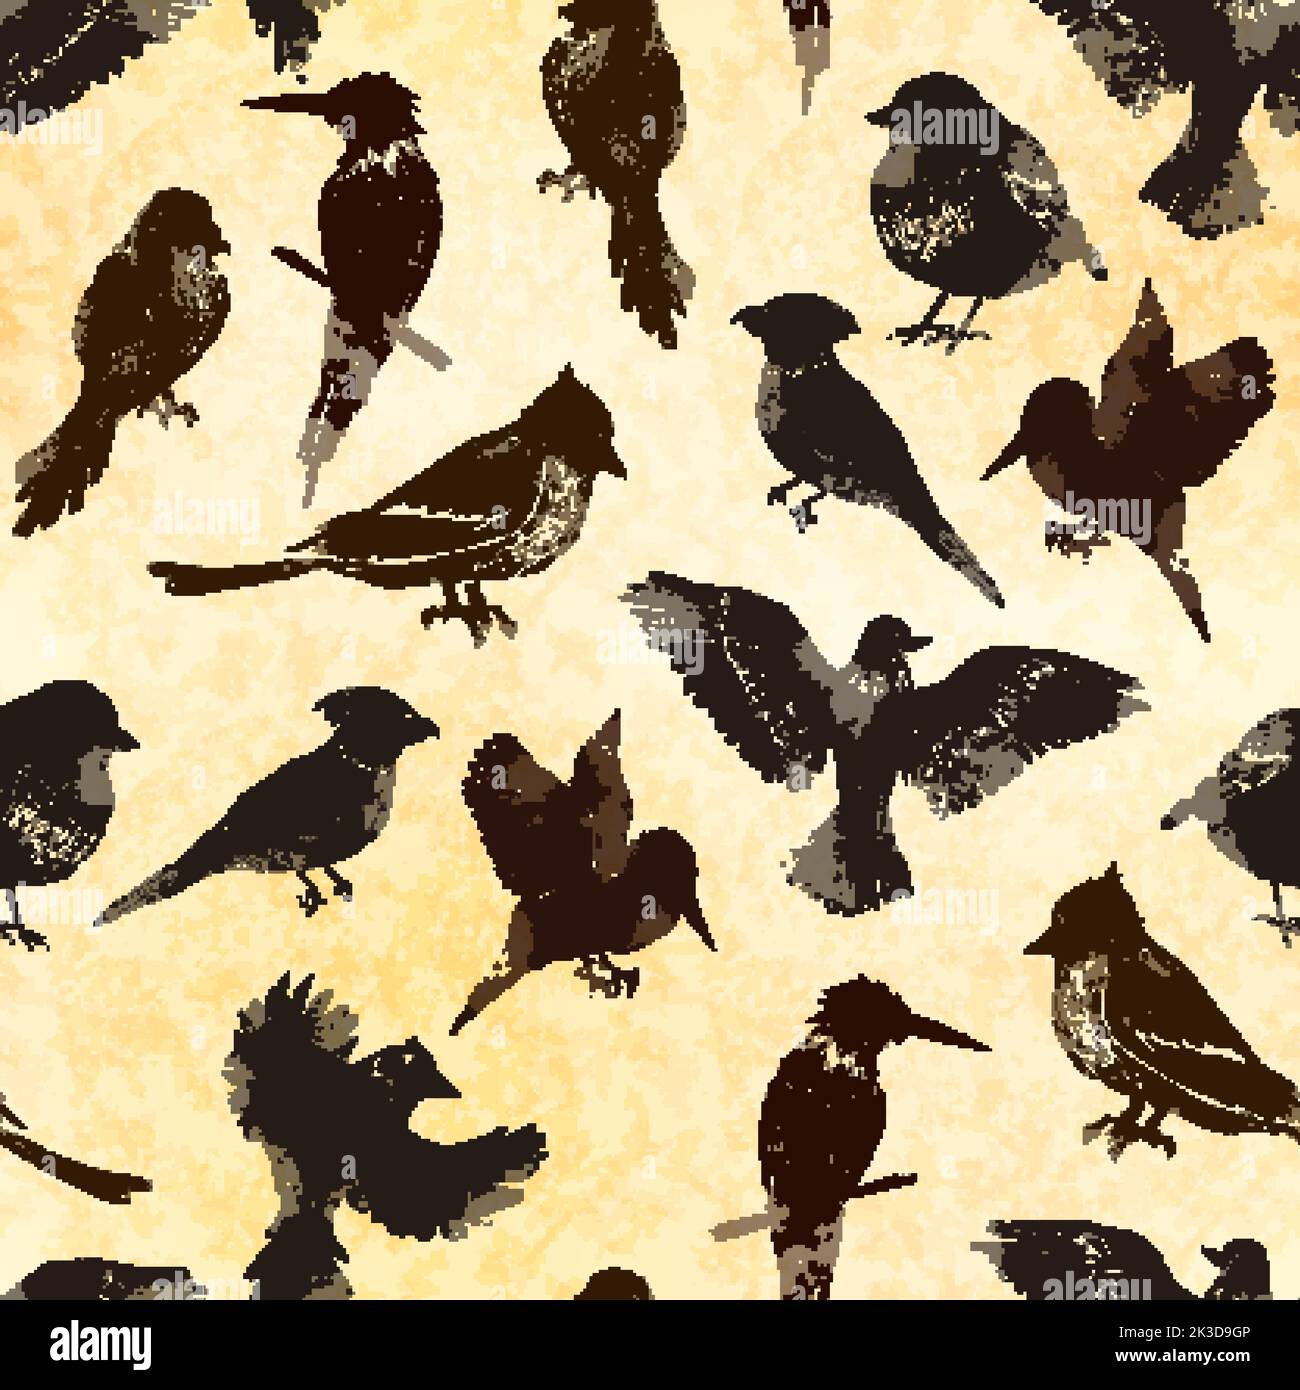 Lot of birds of different species in linocut retro style, vintage seamless pattern on old paper Stock Vector